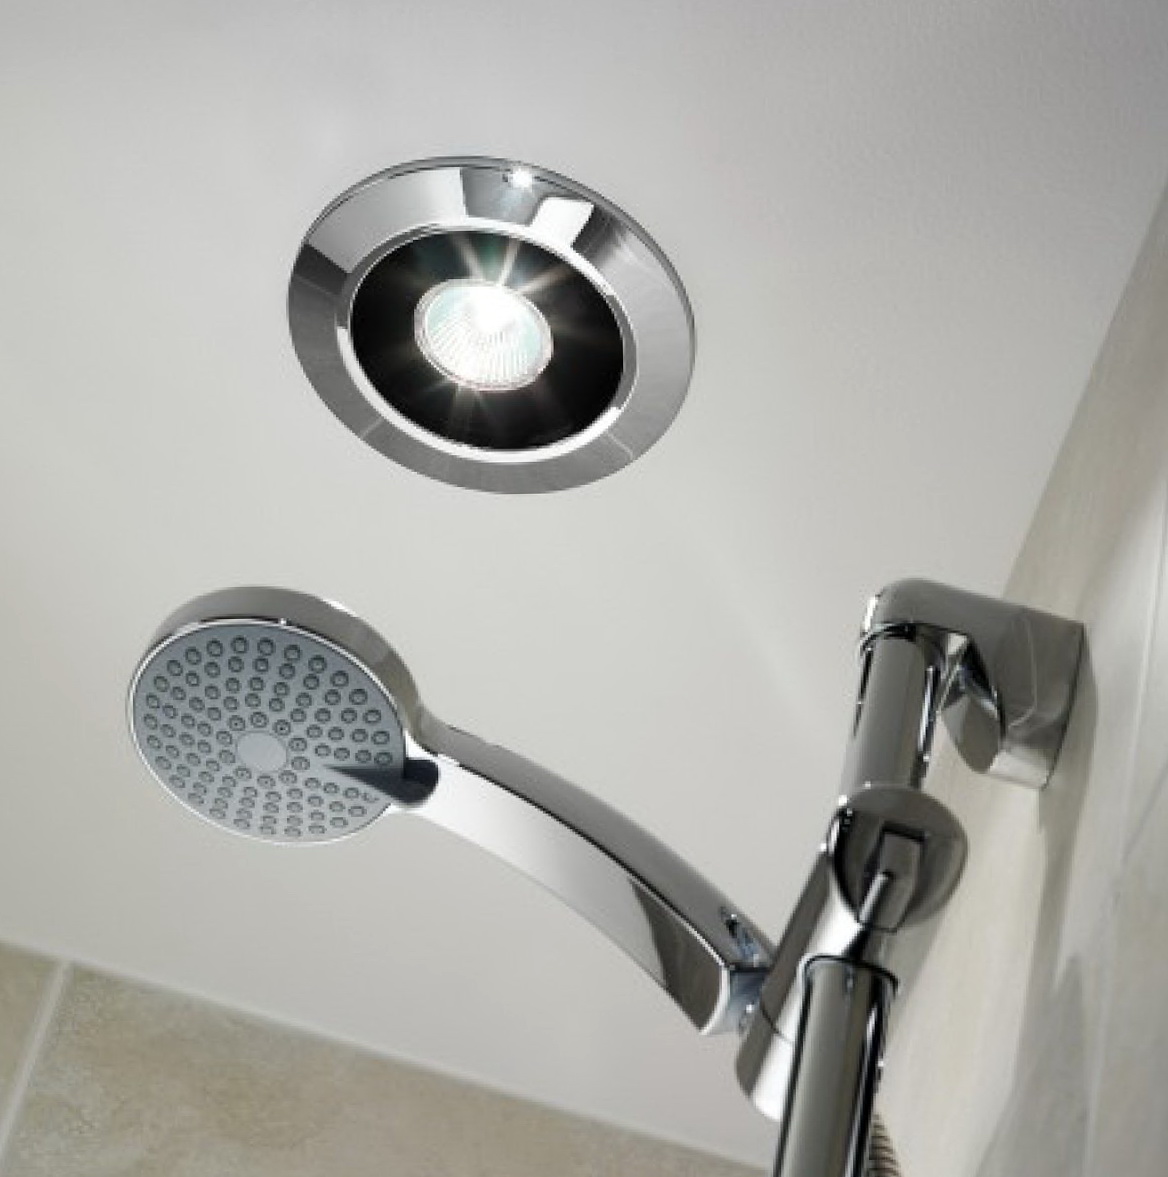 Why you need bathroom exhaust fans ARKBBVJ